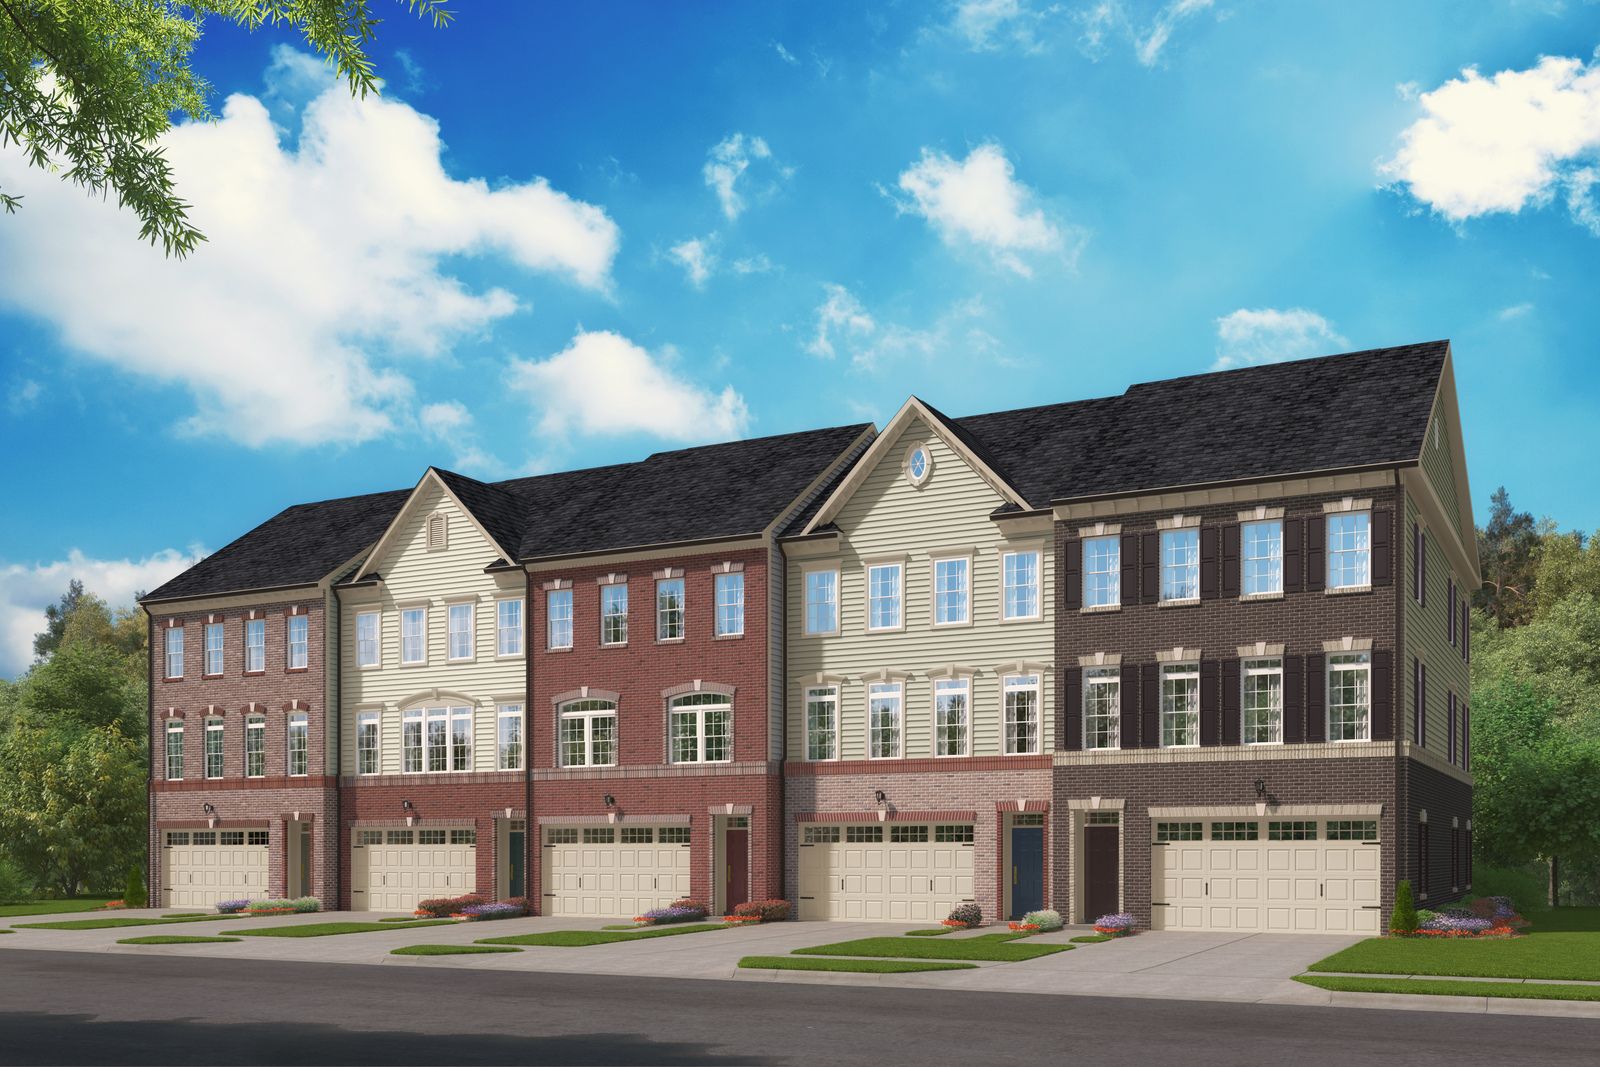 Howard County's Best Value for Grand Townhome Living:Introducing The Reserve at Dorsey's Ridge, a private enclave of NVHomes' largest and most luxurious townhomes. Model open daily by appointment. Schedule a visit today!